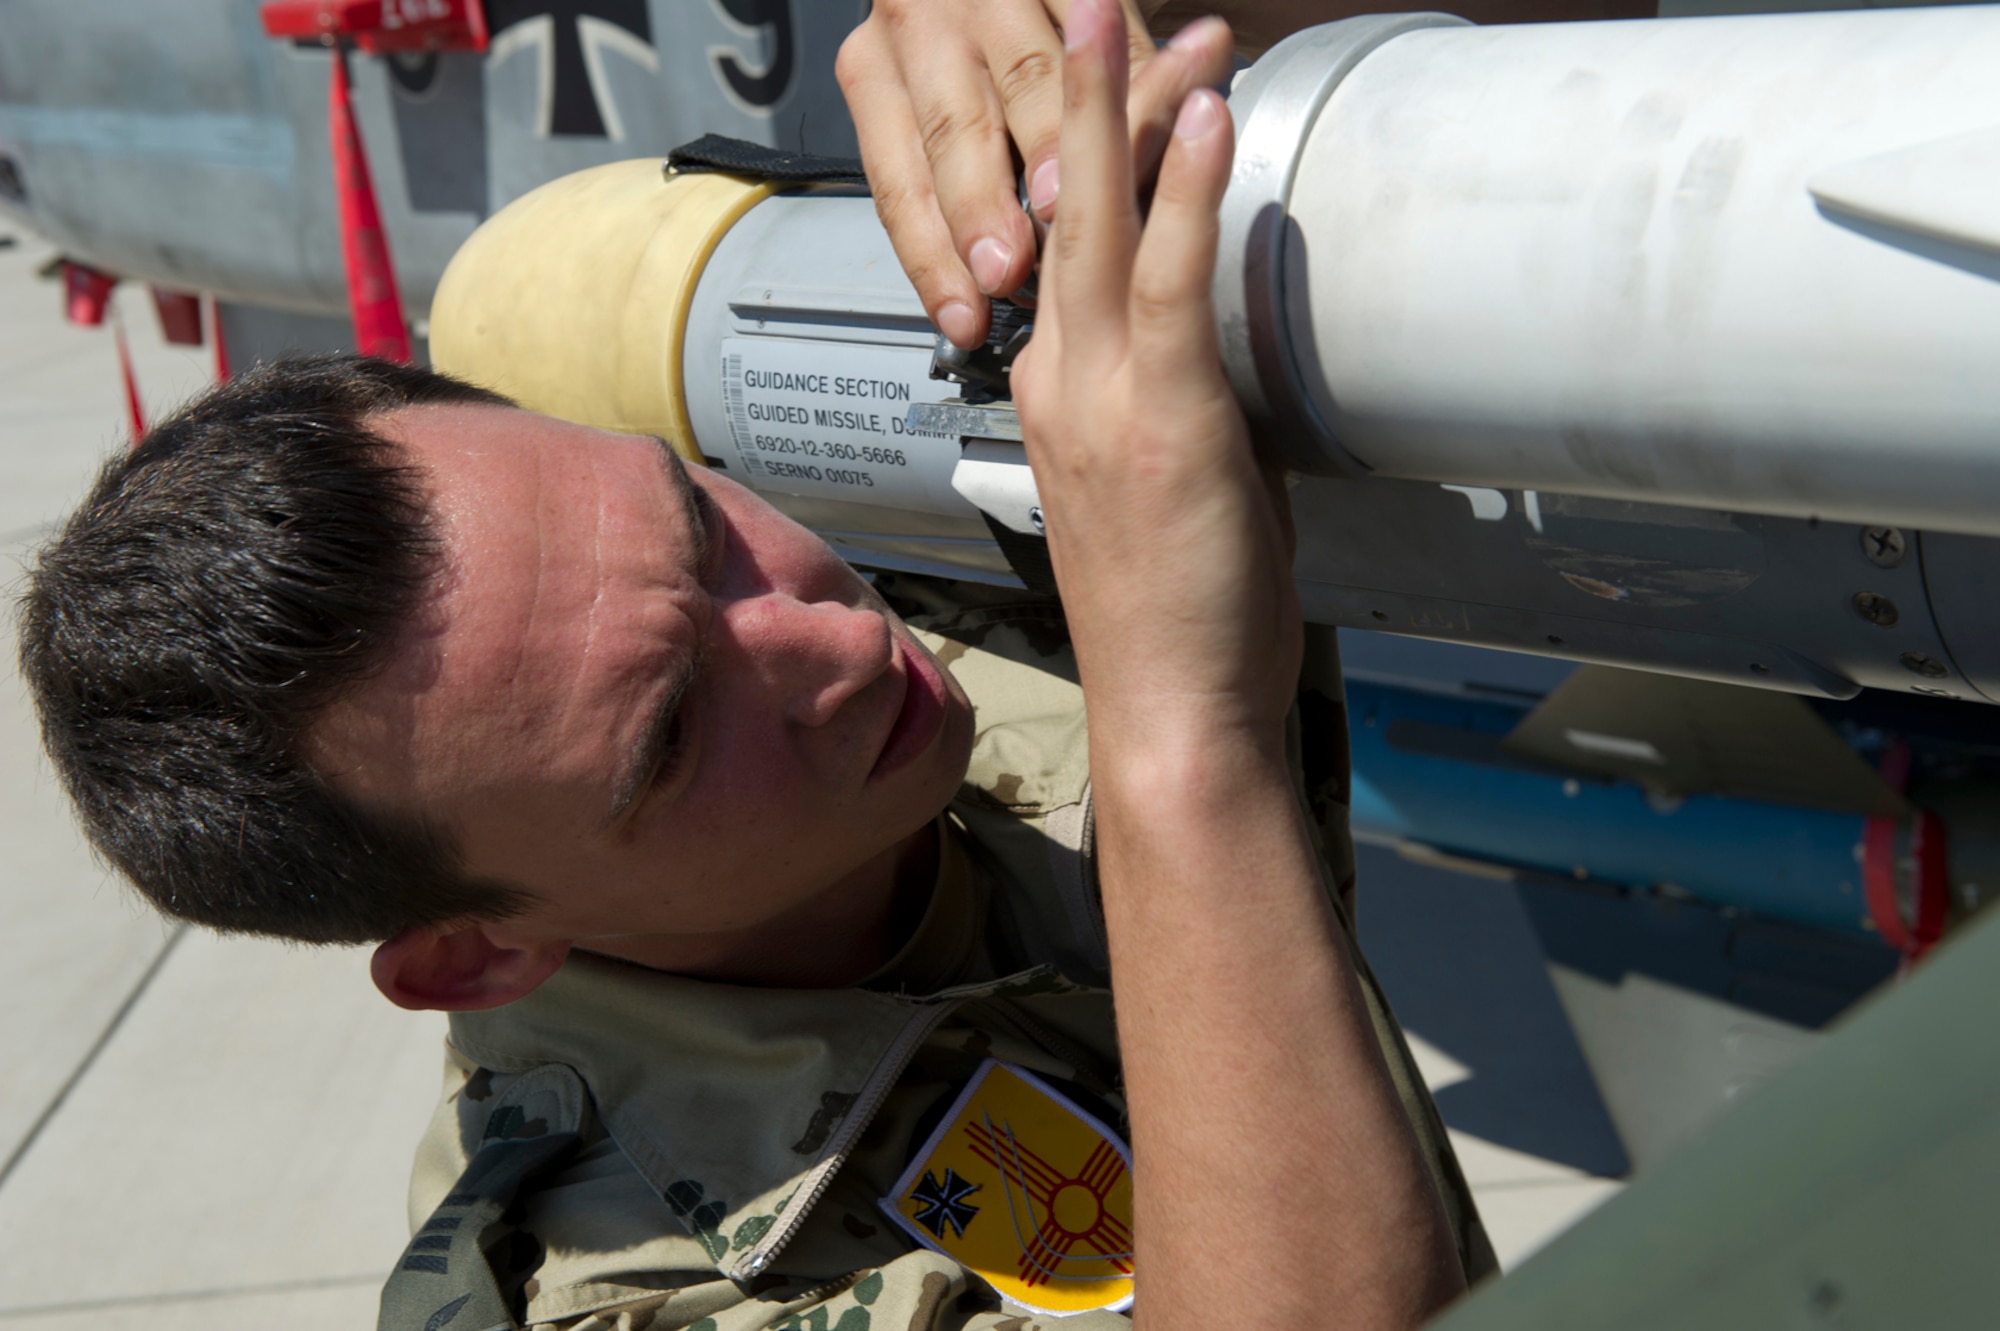 HOLLOMAN AIR FORCE BASE, N.M. -- German Air Force Senior Airman Marco Kollmer, crew chief, connects an AIM-2000 air-to-air missile July 8, 2011, during a quarterly load crew competition. The GAF crew chiefs were competing for the first time against the 49th Maintenance Group for the title of “Best Load Crew.” The competitions are held to give weapons personnel the opportunity to display their warfighting skills and unveils the best weapons load crew for a particular quarter during the year.  (U.S. Air Force photo by Airman 1st Class Joshua Turner/Released)